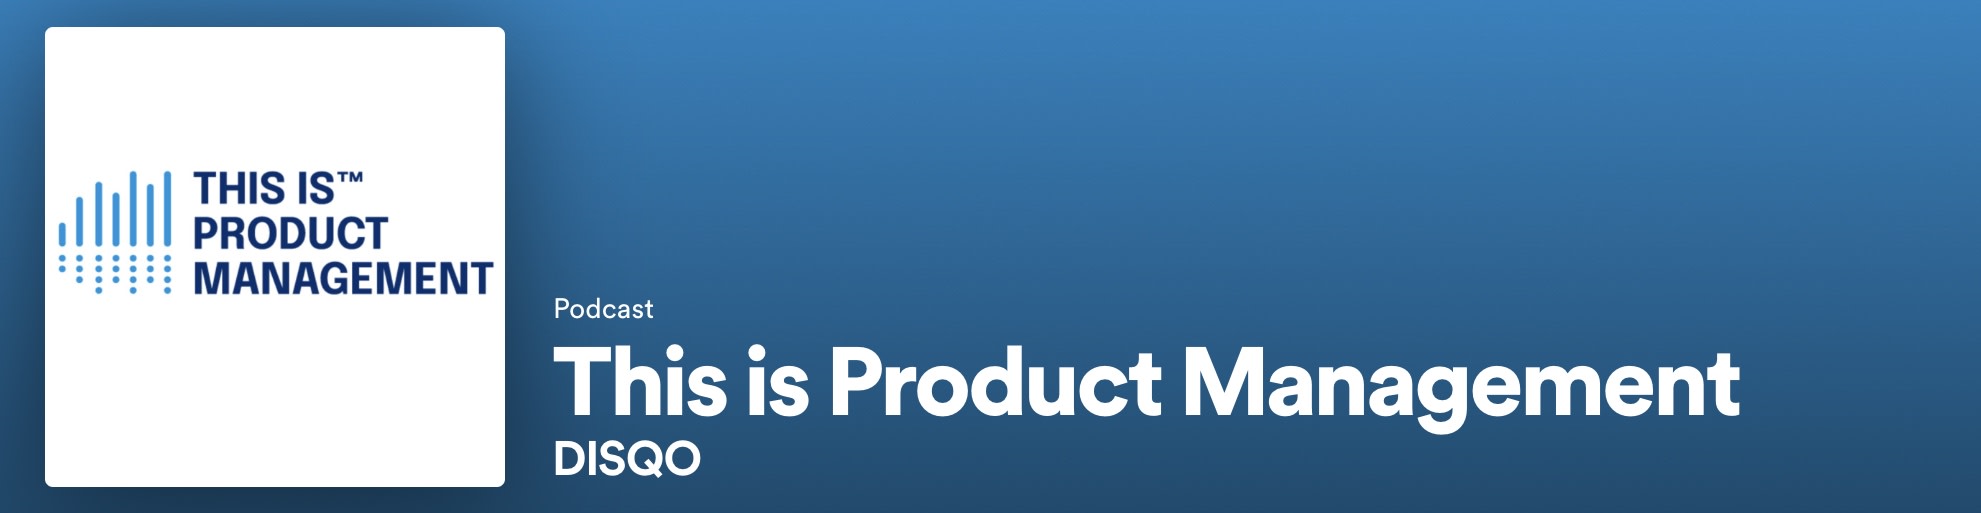 This is Product Management